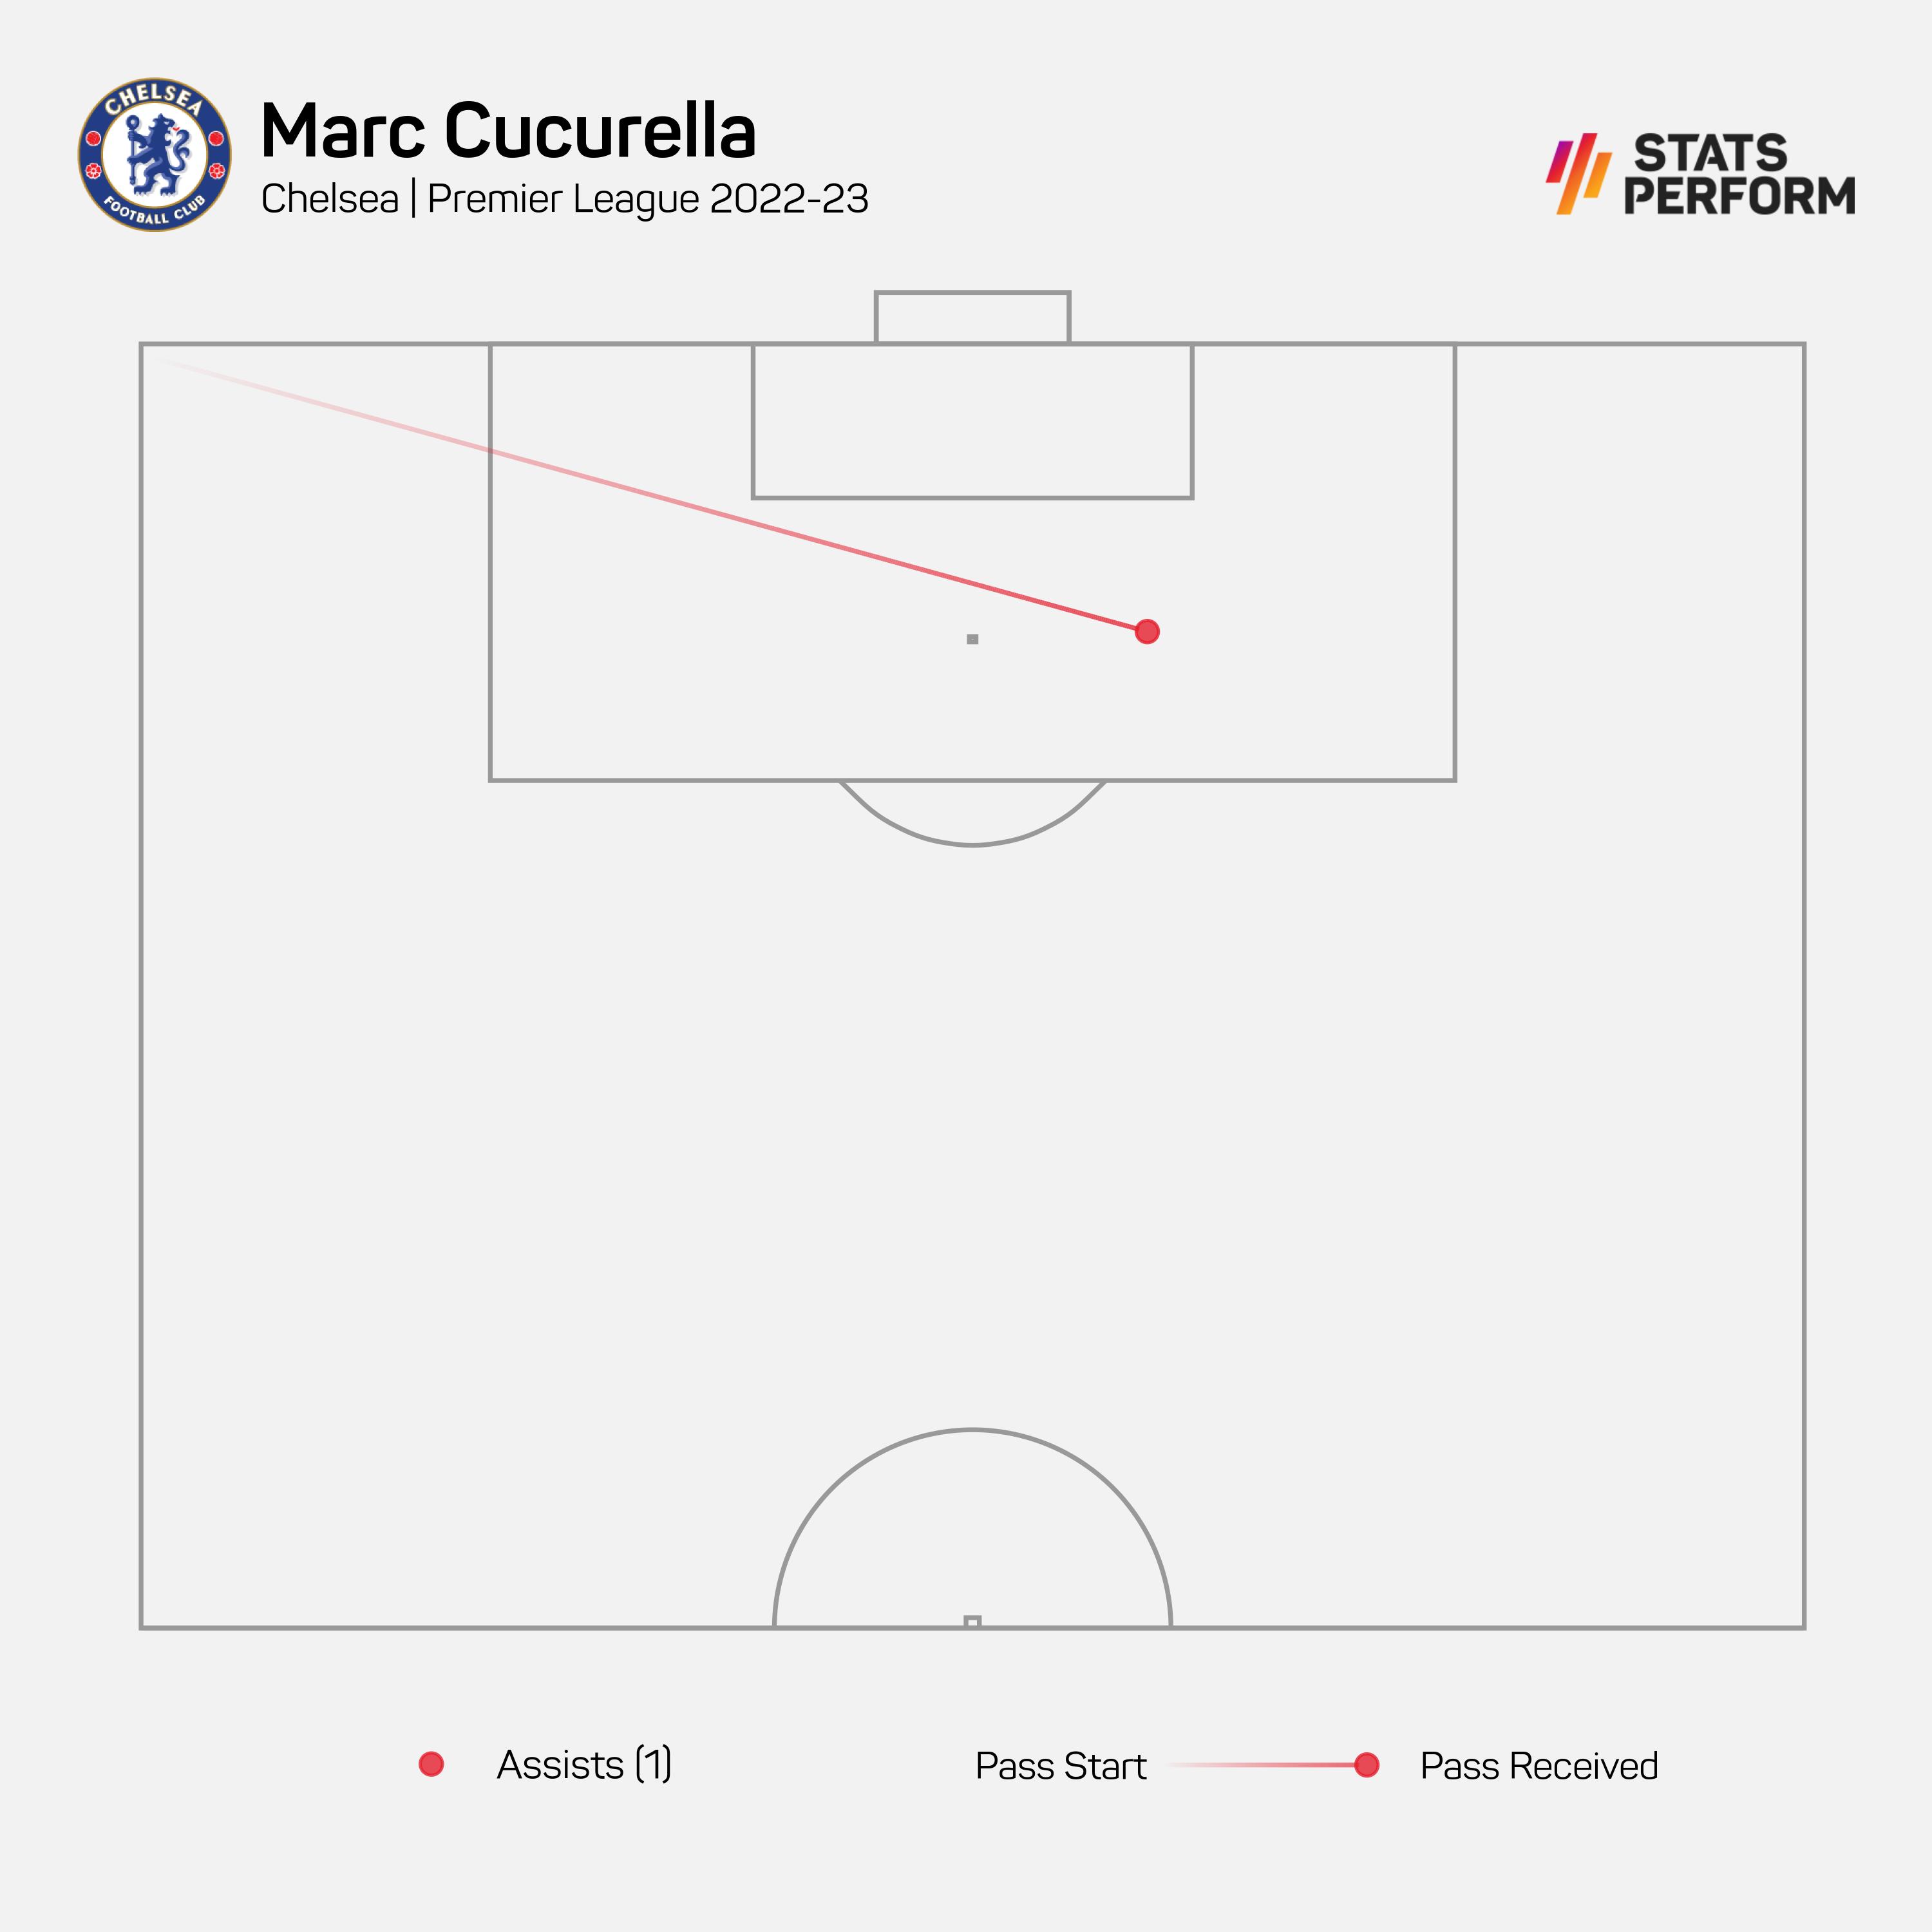 Marc Cucurella assisted his first Chelsea goal on Sunday